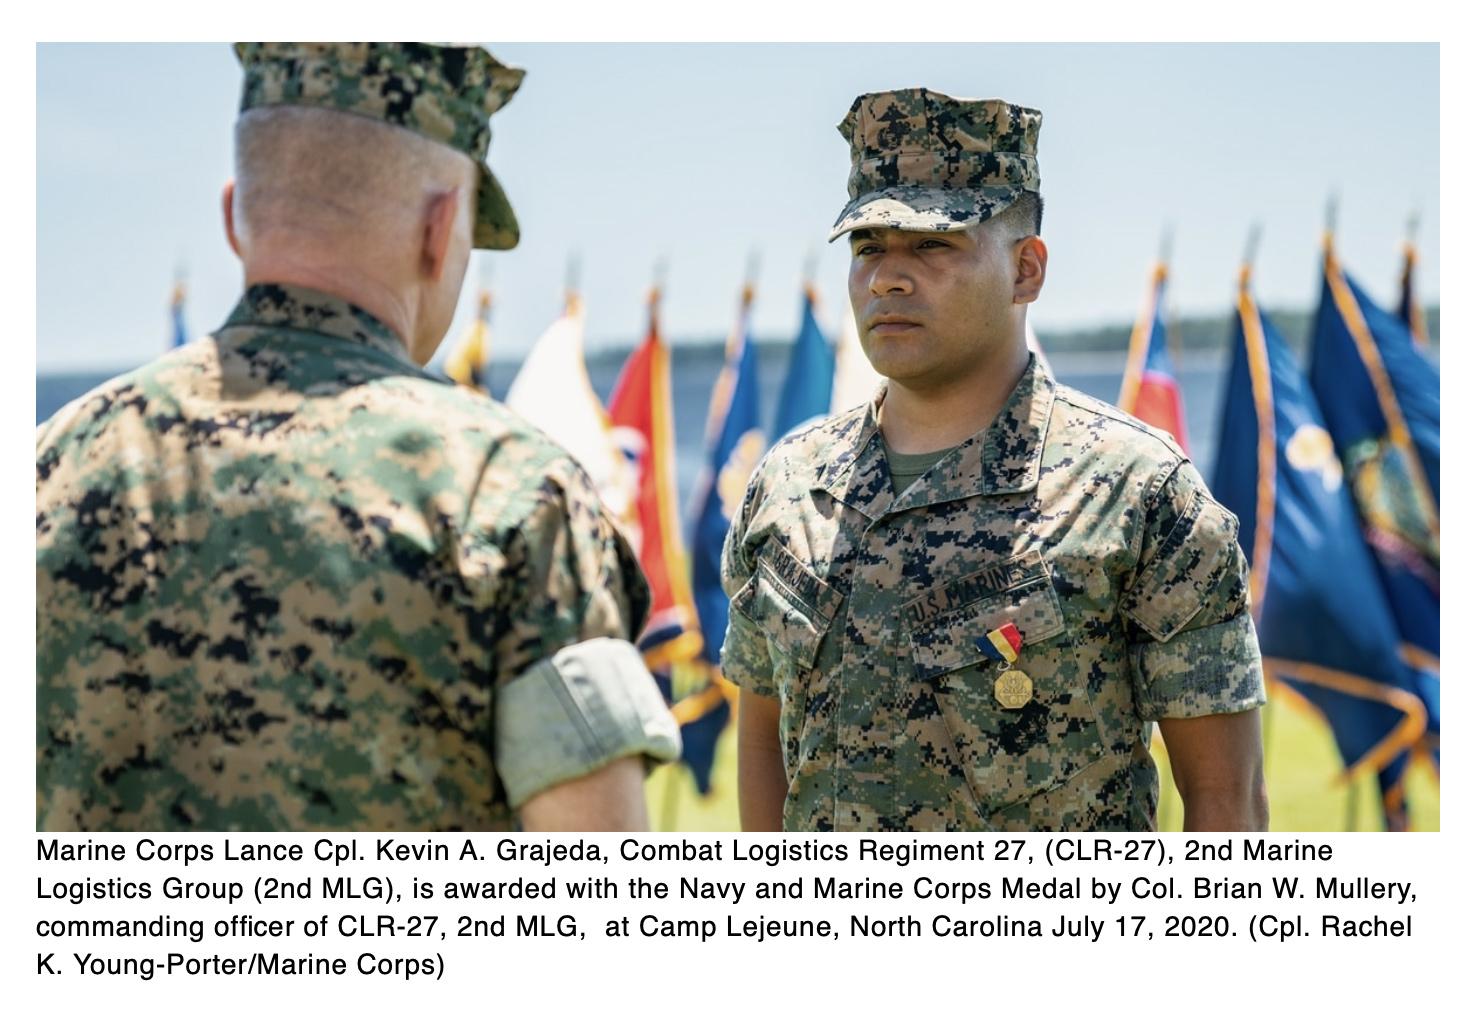  Marine awarded highest noncombat medal for heroic action in North Carolina traffic accident